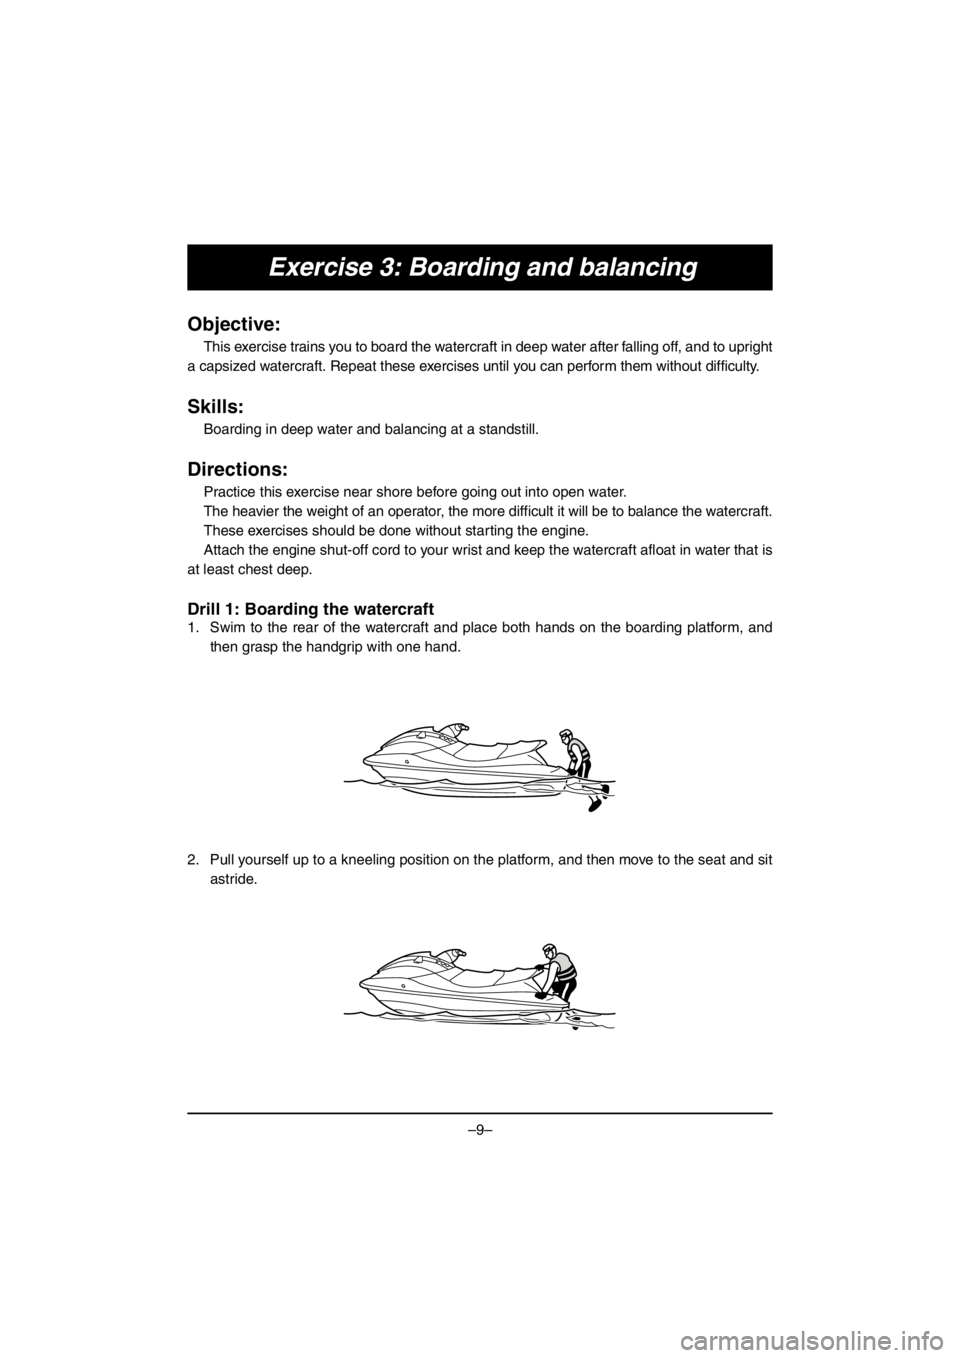 YAMAHA V1 2016  Manuale duso (in Italian) –9–
Exercise 3: Boarding and balancing
Objective:
This exercise trains you to board the watercraft in deep water after falling off, and to upright
a capsized watercraft. Repeat these exercises unt